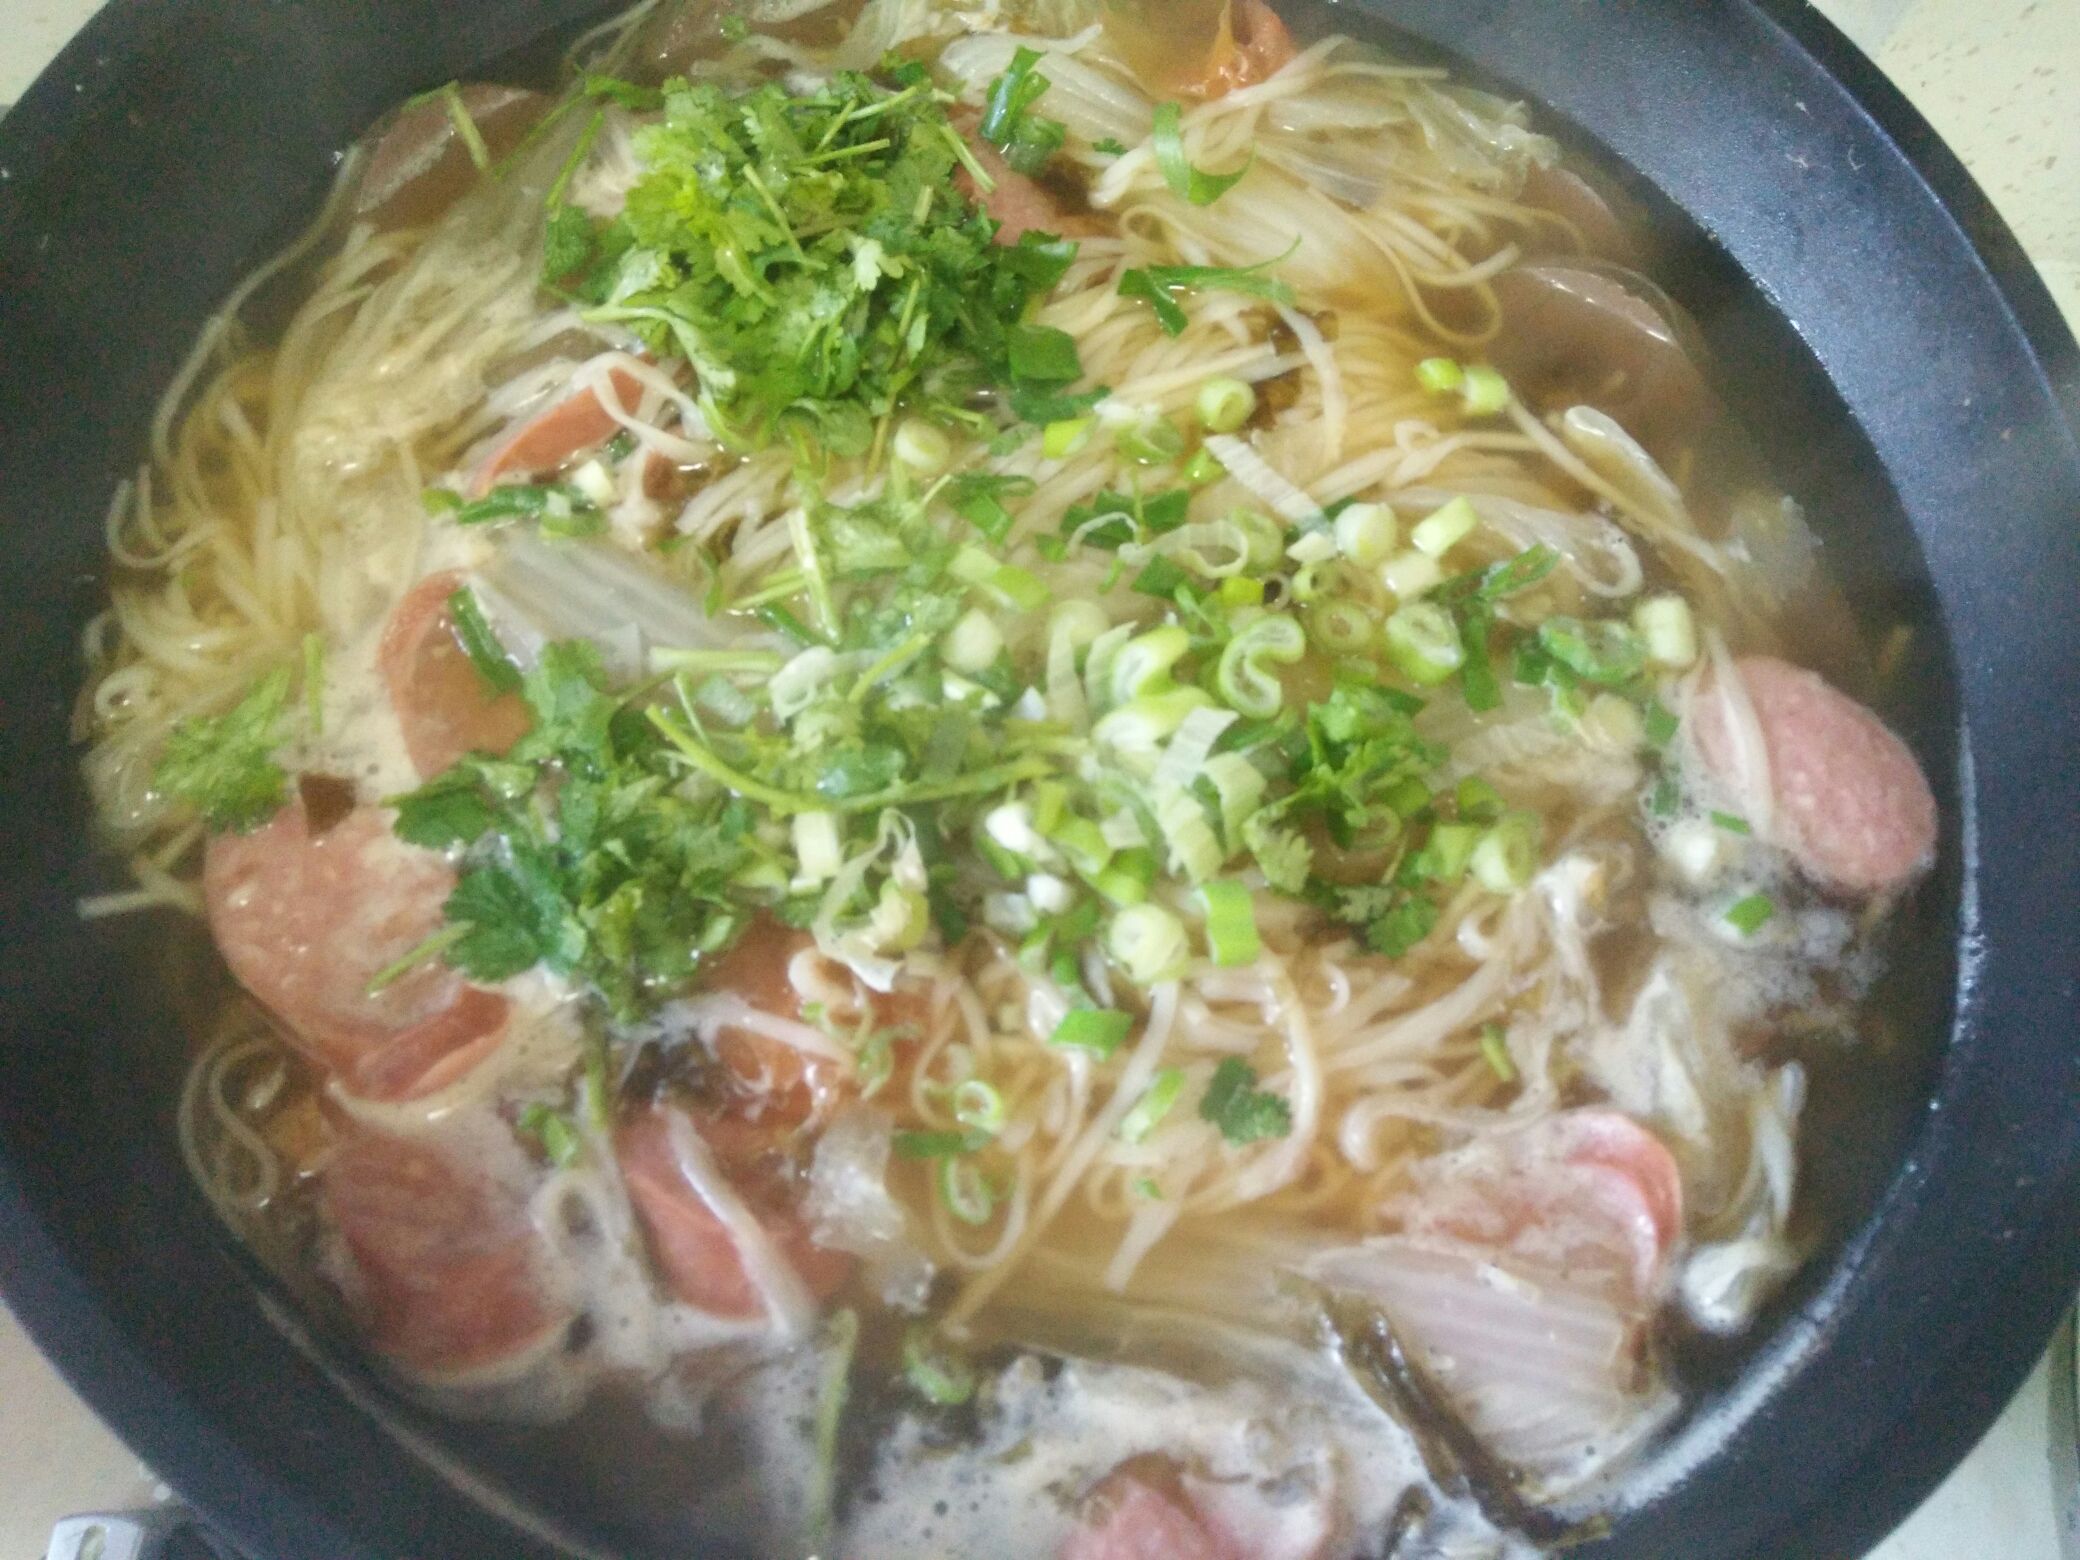 Noodles in Hot Soup recipe